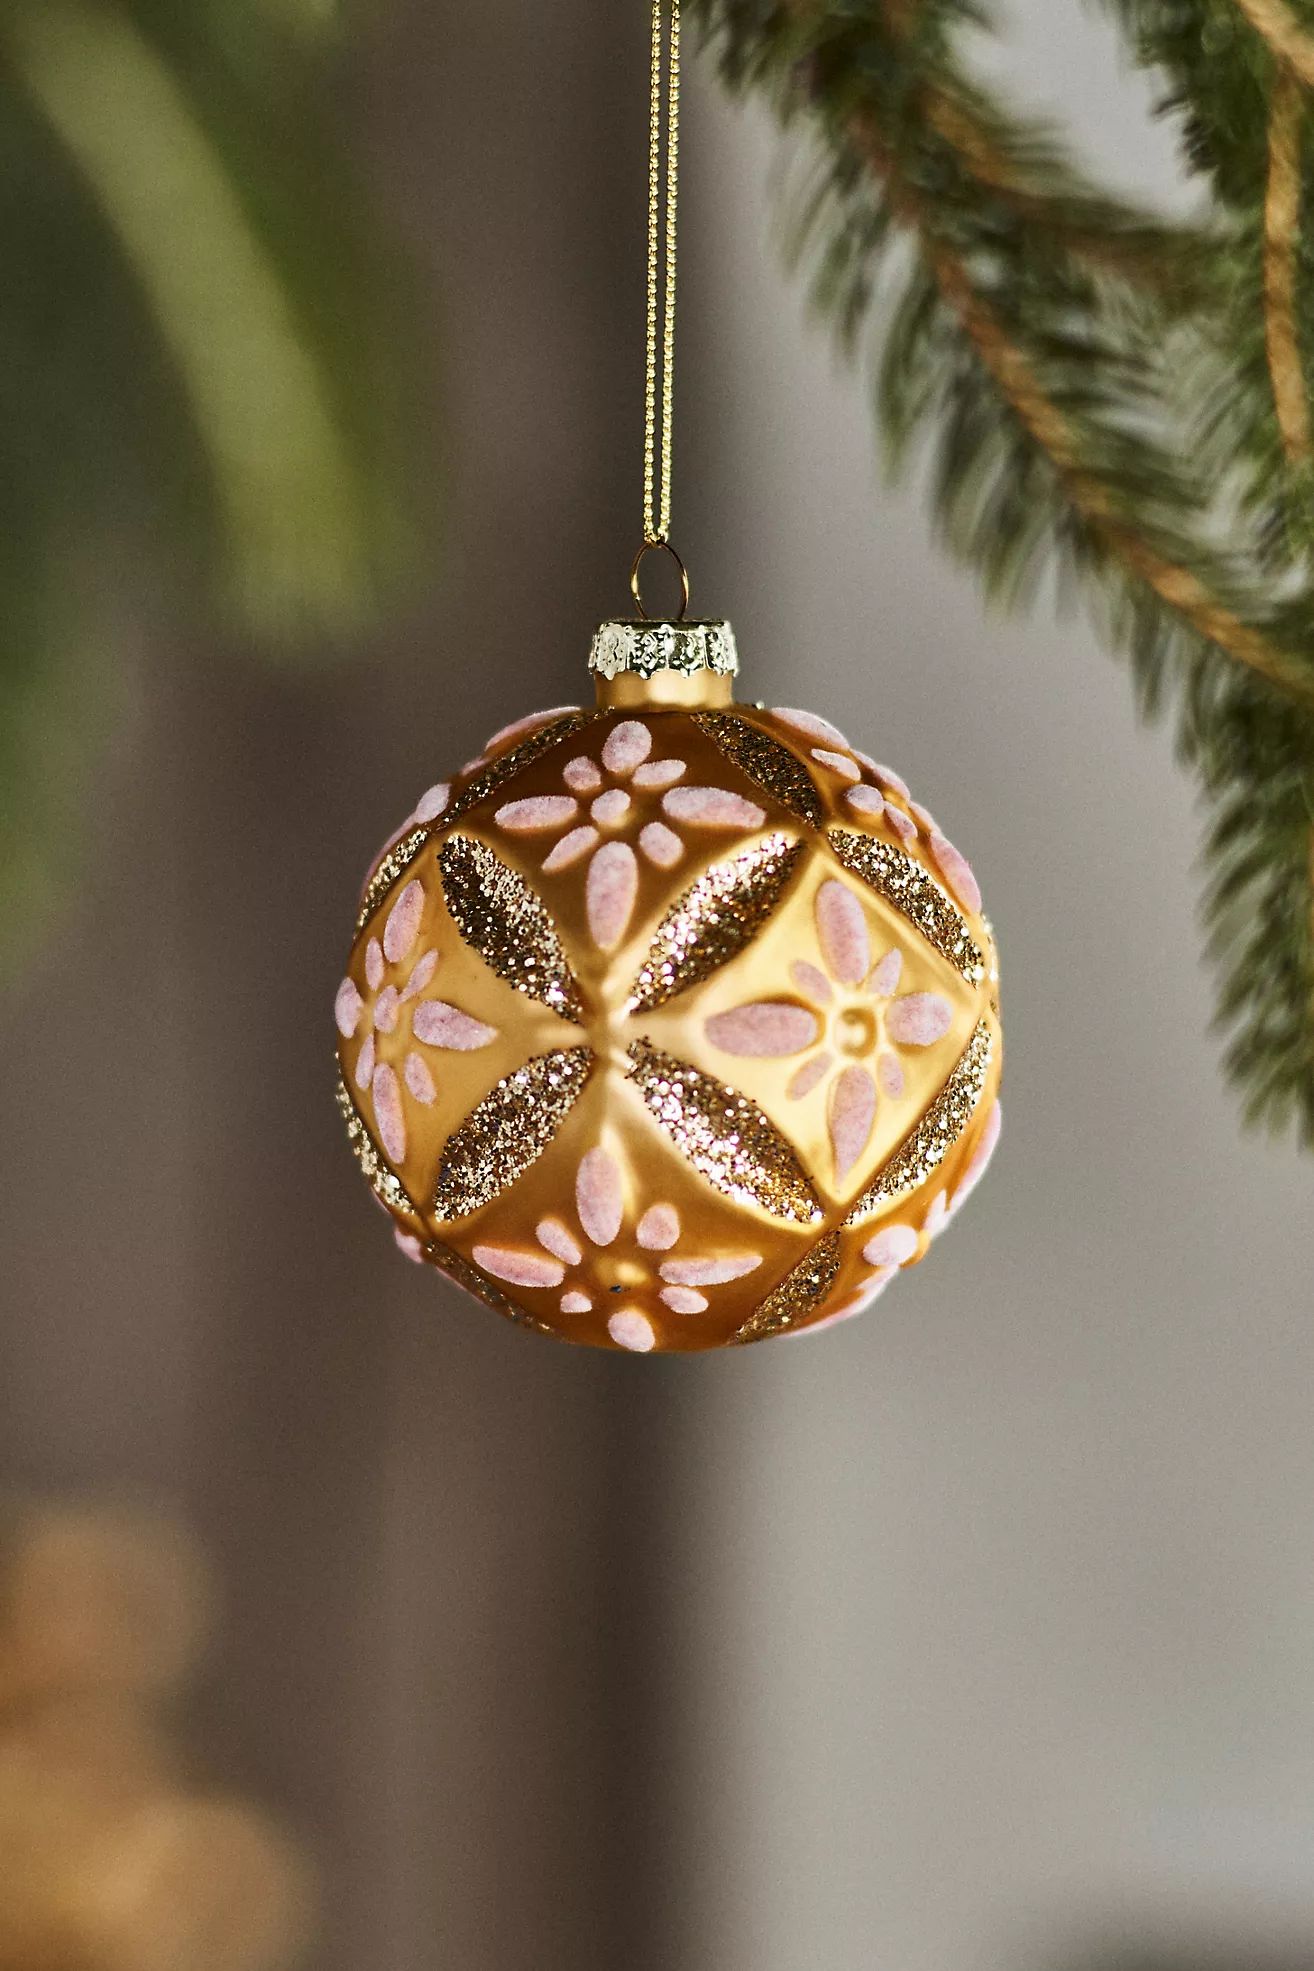 Gilded Floral Glass Globe Ornament | Anthropologie (US)